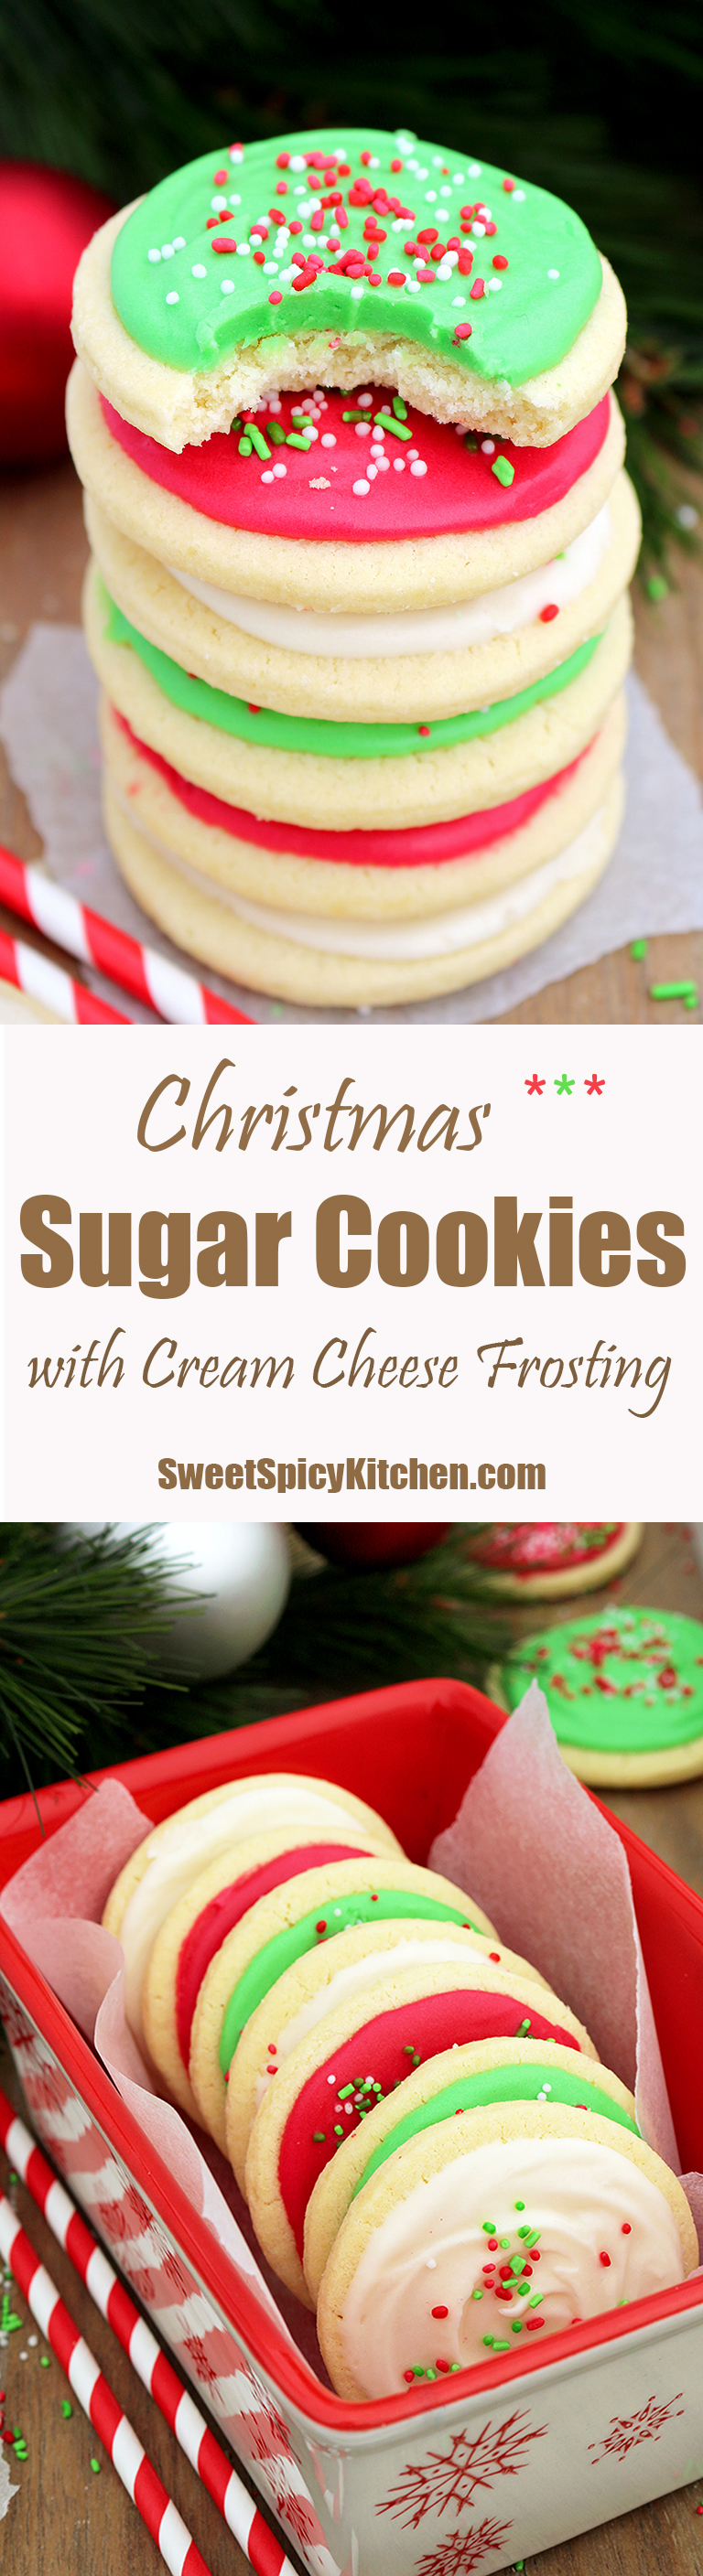 Christmas Sugar Cookies with Cream Cheese Frosting are perfect for the upcoming holiday – Christmas, especially for those who like sugar cookies on their Christmas plates